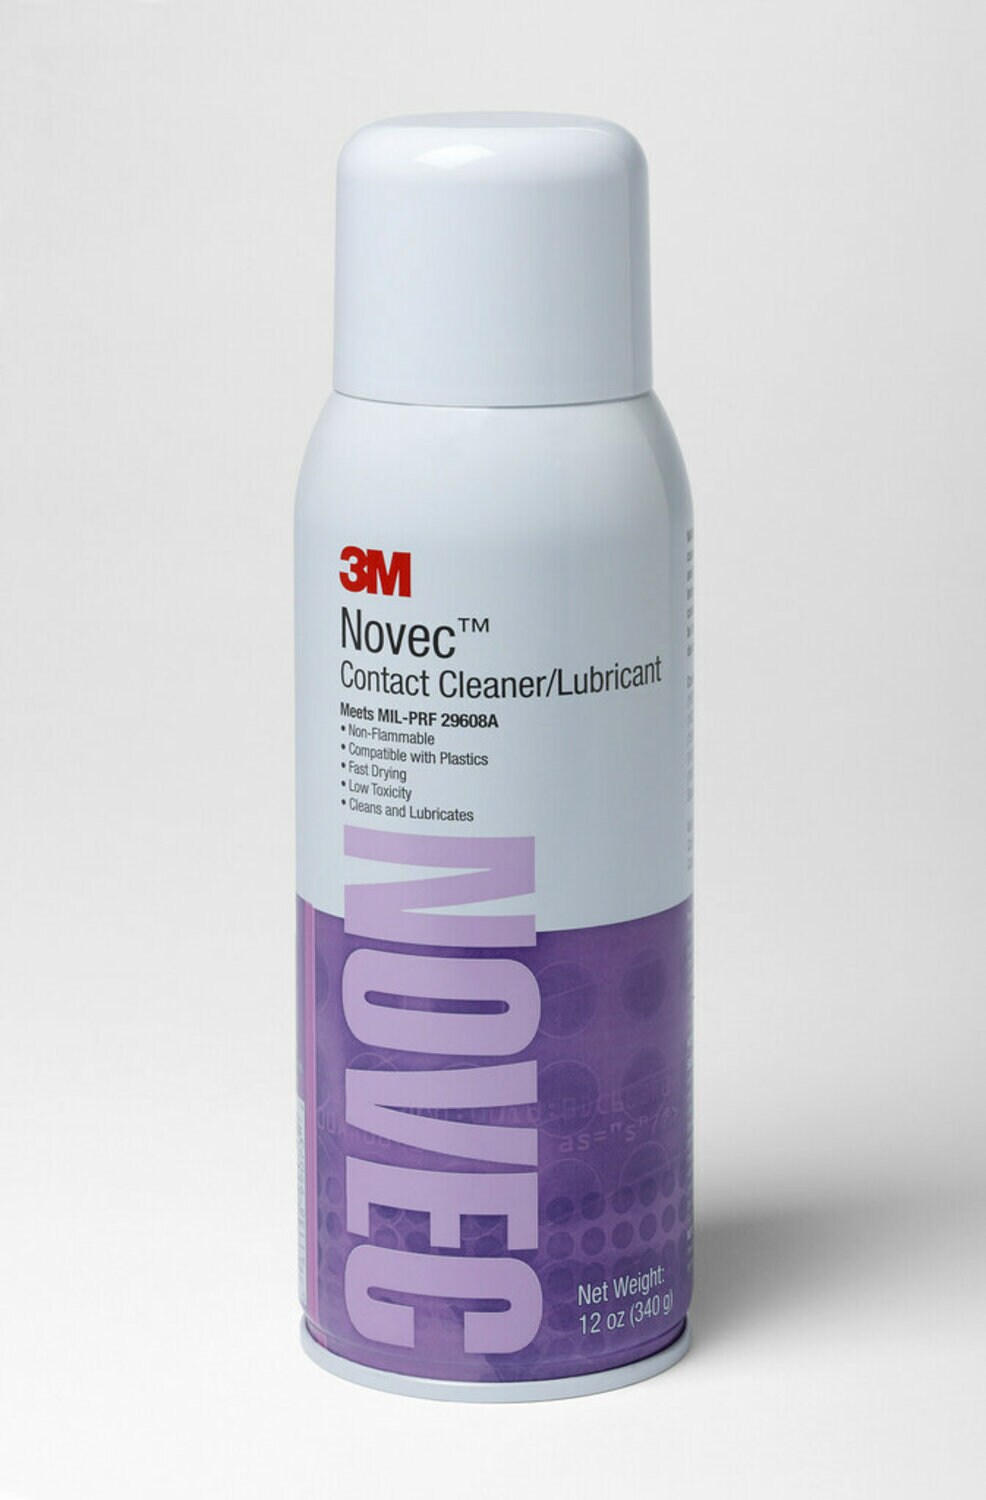 7100067834 - 3M Novec Contact Cleaner/Lubricant, 340 g (12 oz), 6 Canisters/Case